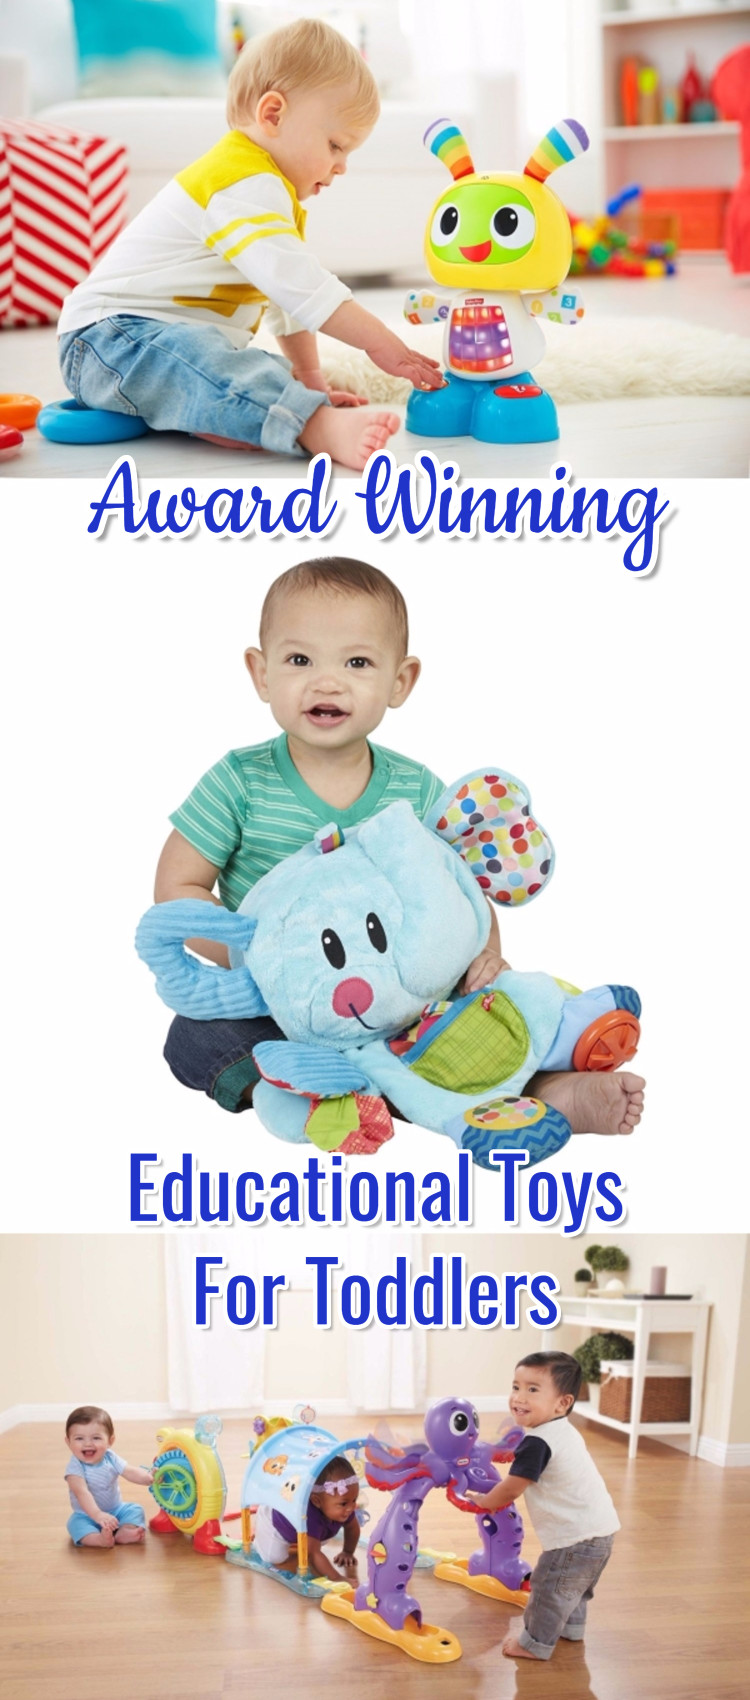 Award Winning Educational Toys for Toddlers and Pre-Schoolers